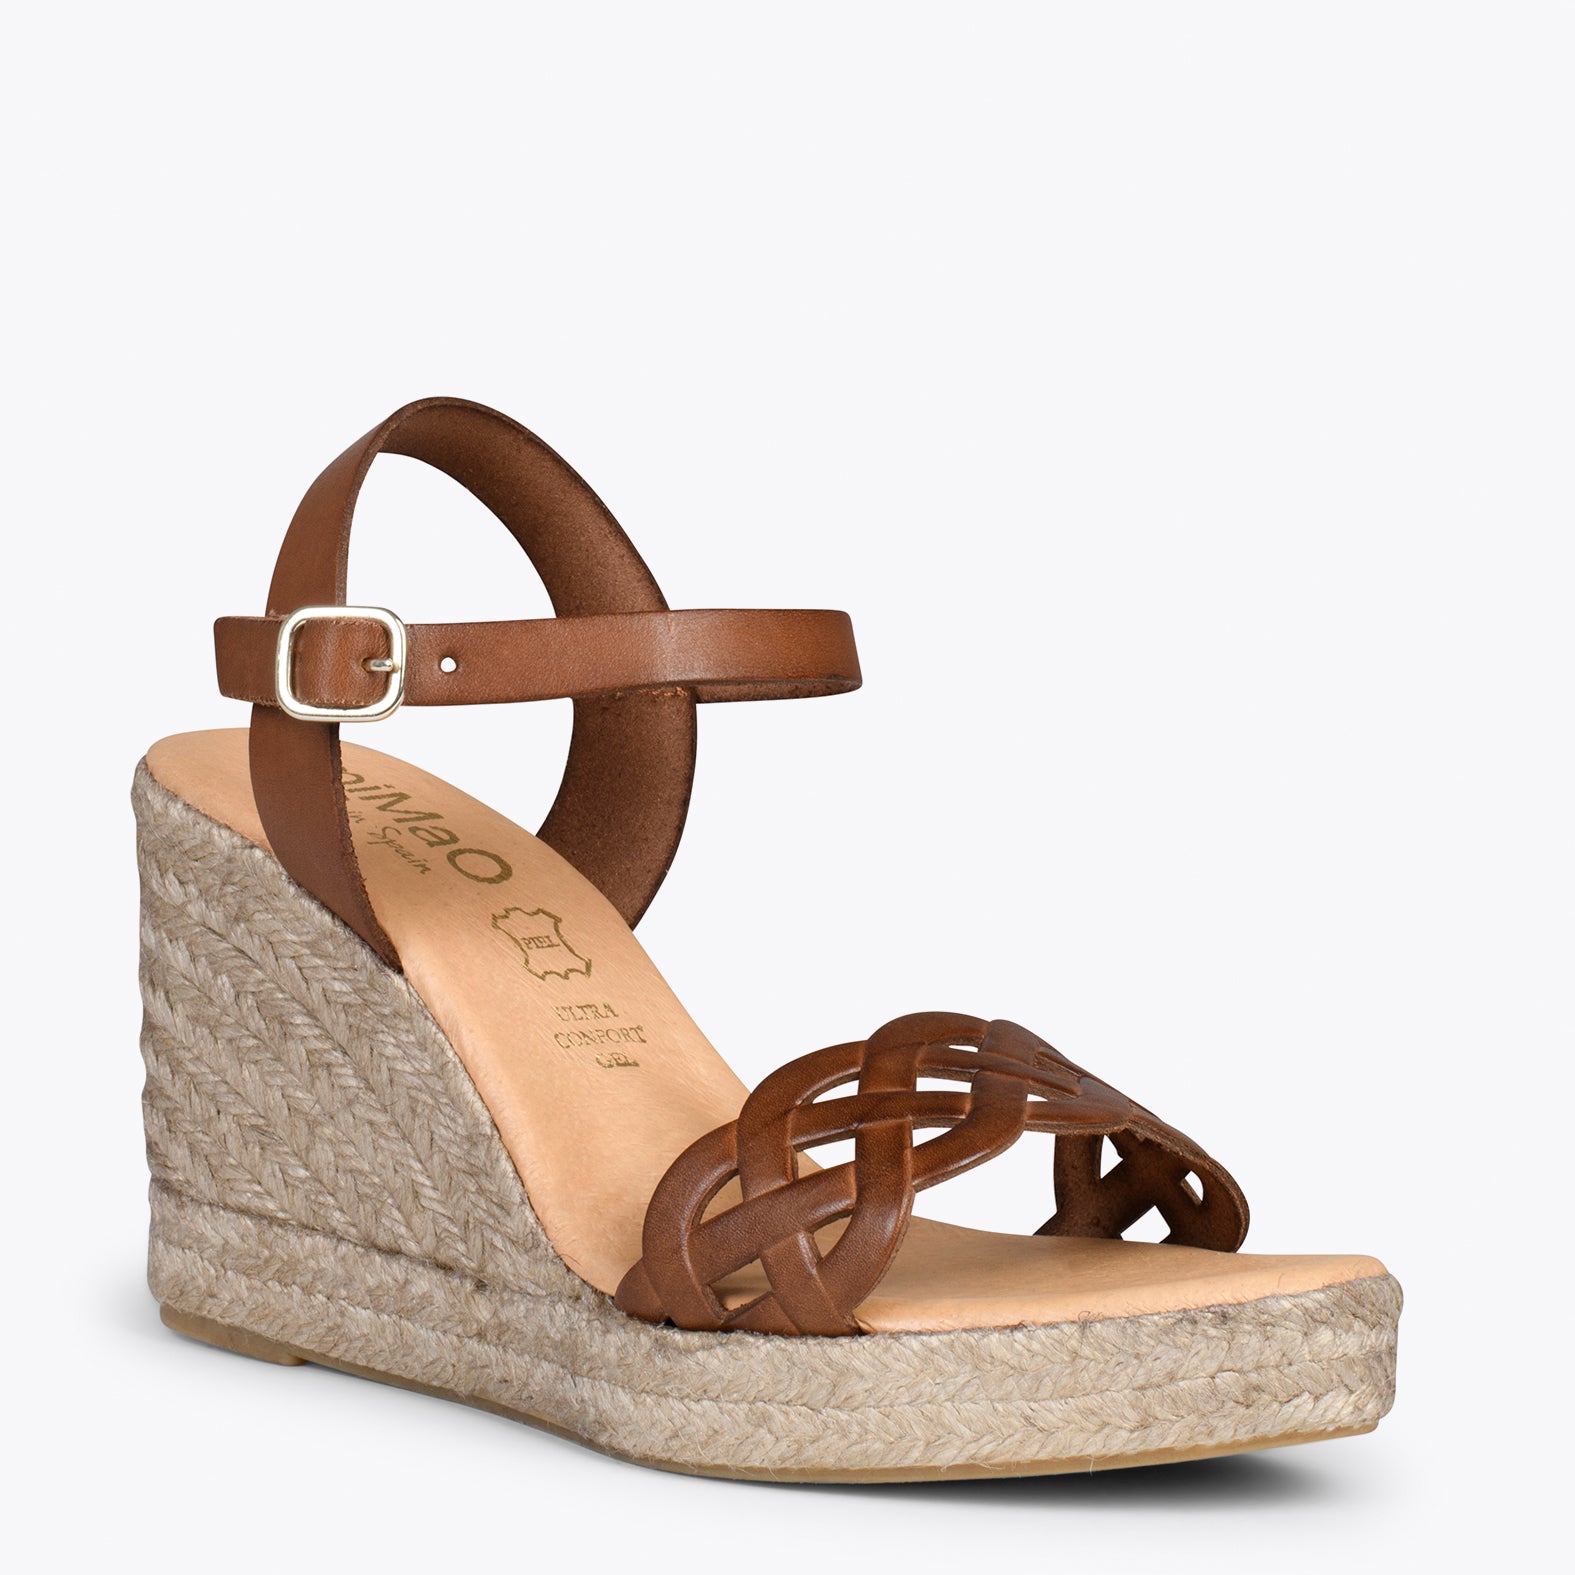 OASIS – BROWN espadrille wedges with braided front